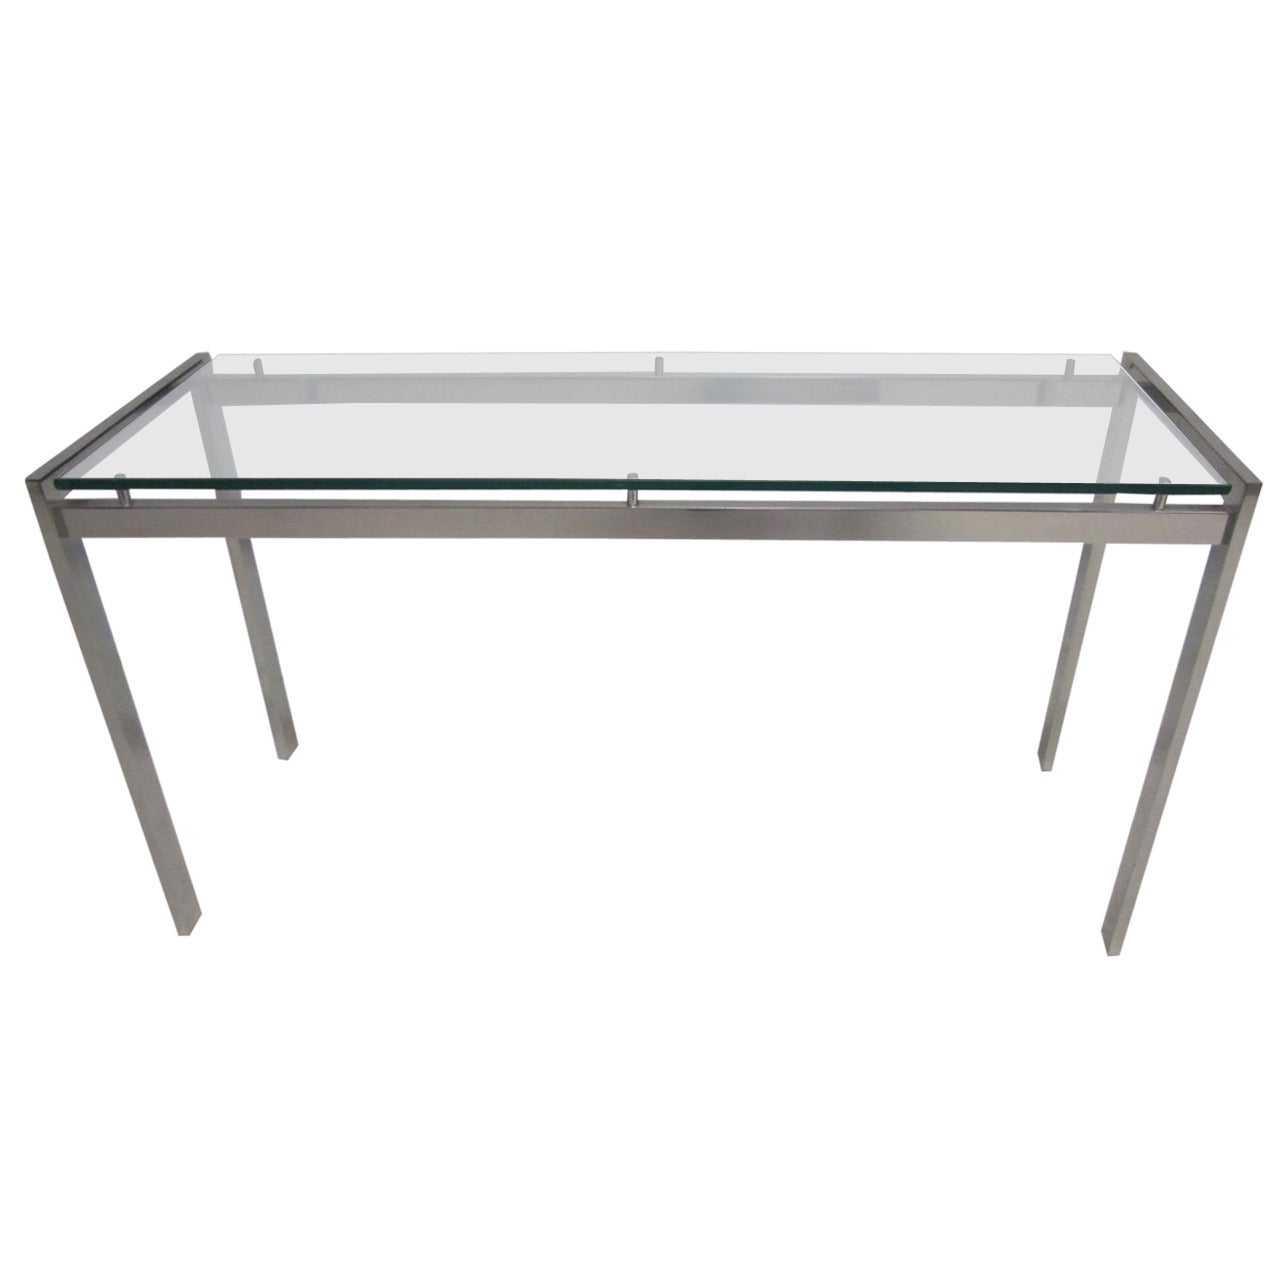 1970s Polished Aluminum Long, Mid-Century Modern Console Table